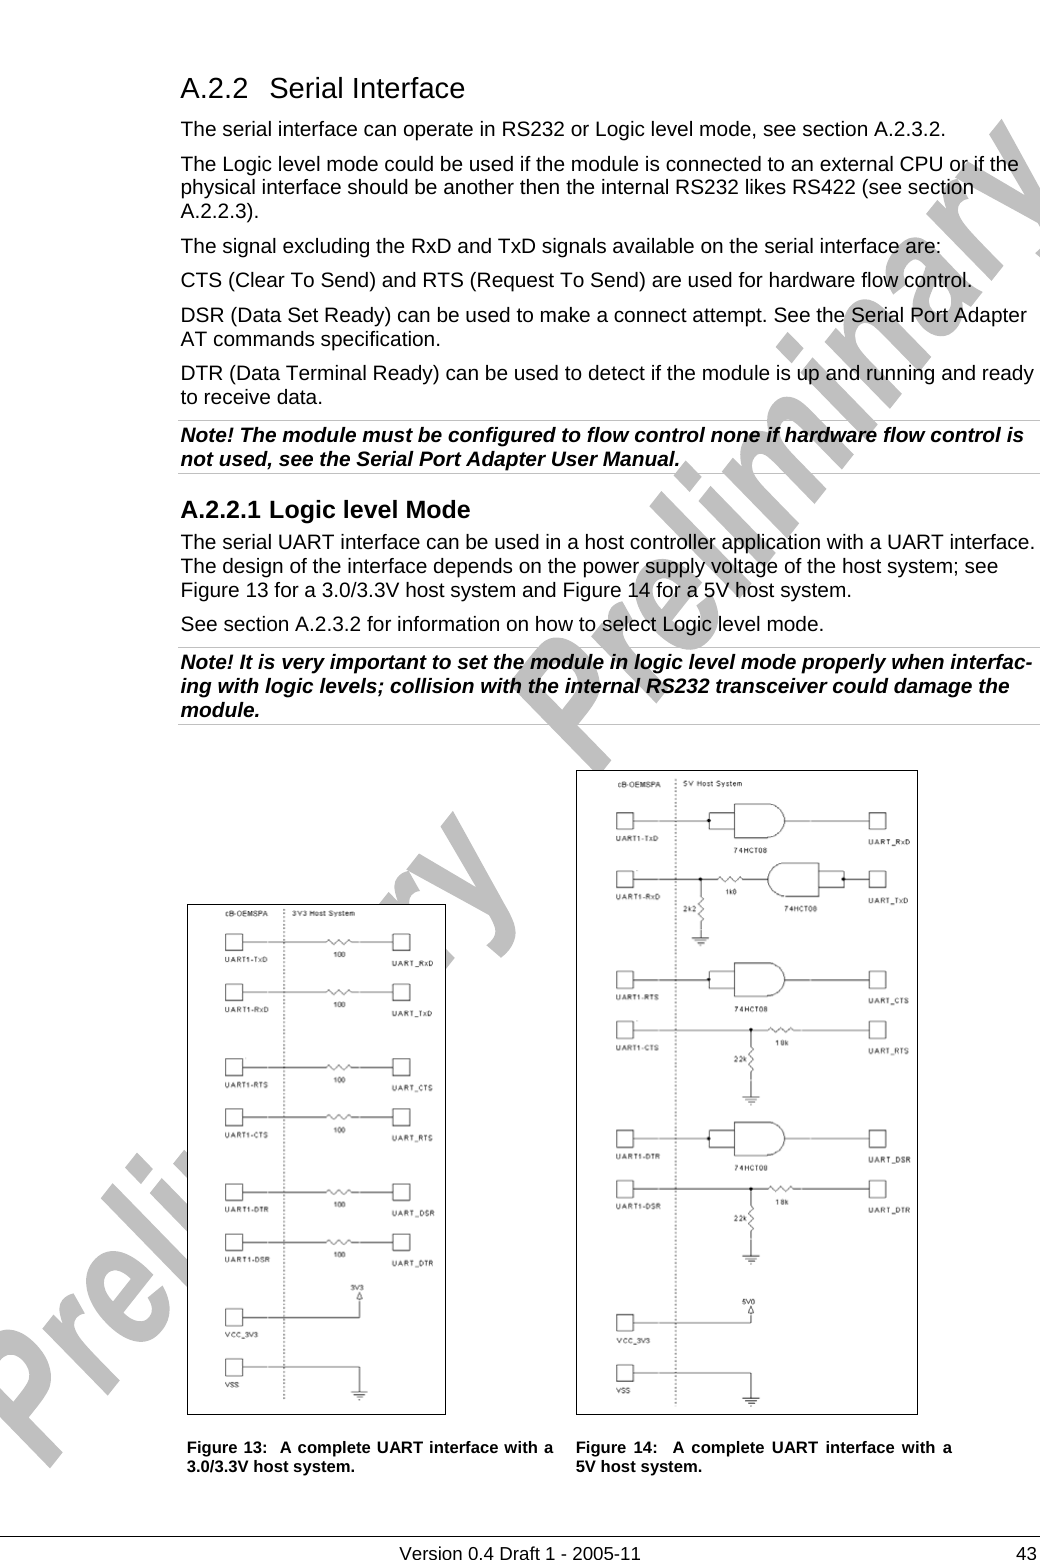          Version 0.4 Draft 1 - 2005-11  43 A.2.2 Serial Interface The serial interface can operate in RS232 or Logic level mode, see section A.2.3.2. The Logic level mode could be used if the module is connected to an external CPU or if the physical interface should be another then the internal RS232 likes RS422 (see section A.2.2.3). The signal excluding the RxD and TxD signals available on the serial interface are: CTS (Clear To Send) and RTS (Request To Send) are used for hardware flow control. DSR (Data Set Ready) can be used to make a connect attempt. See the Serial Port Adapter AT commands specification. DTR (Data Terminal Ready) can be used to detect if the module is up and running and ready to receive data. Note! The module must be configured to flow control none if hardware flow control is not used, see the Serial Port Adapter User Manual. A.2.2.1 Logic level Mode The serial UART interface can be used in a host controller application with a UART interface. The design of the interface depends on the power supply voltage of the host system; see Figure 13 for a 3.0/3.3V host system and Figure 14 for a 5V host system.  See section A.2.3.2 for information on how to select Logic level mode. Note! It is very important to set the module in logic level mode properly when interfac-ing with logic levels; collision with the internal RS232 transceiver could damage the module.     Figure 13:  A complete UART interface with a 3.0/3.3V host system.   Figure 14:  A complete UART interface with a 5V host system. 